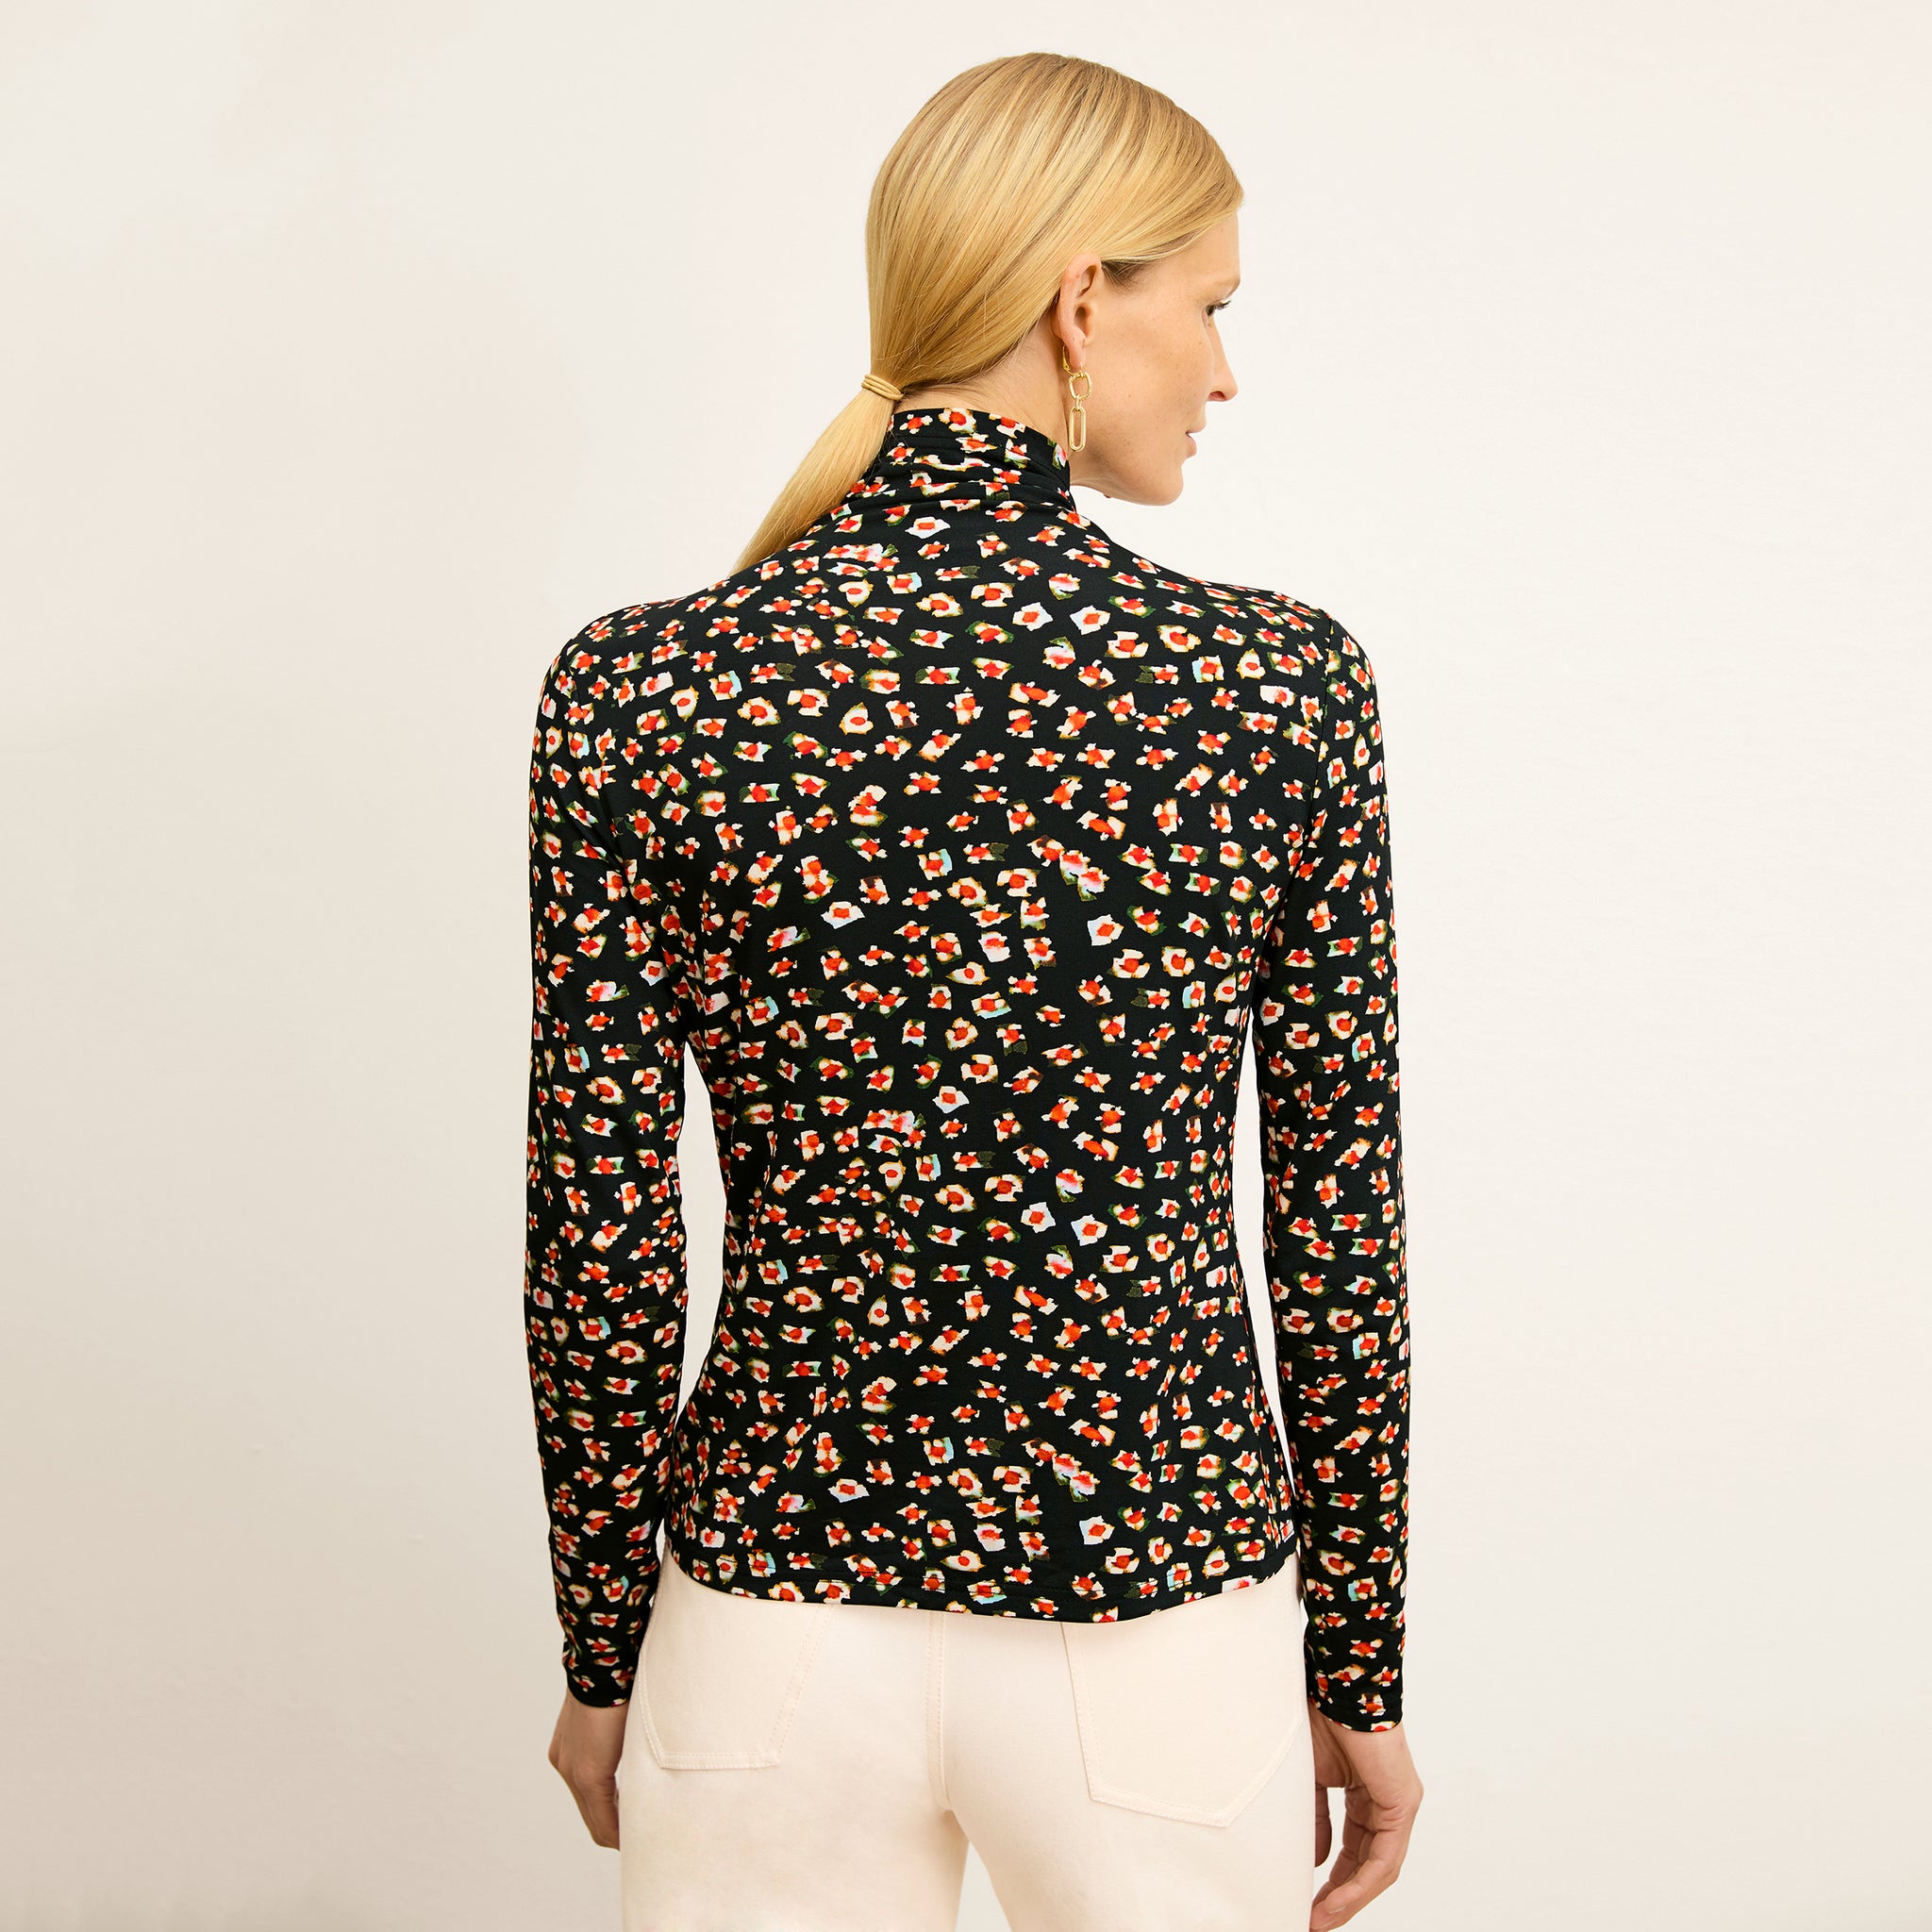 back image of a woman wearing the axam top in kaleidoscope print